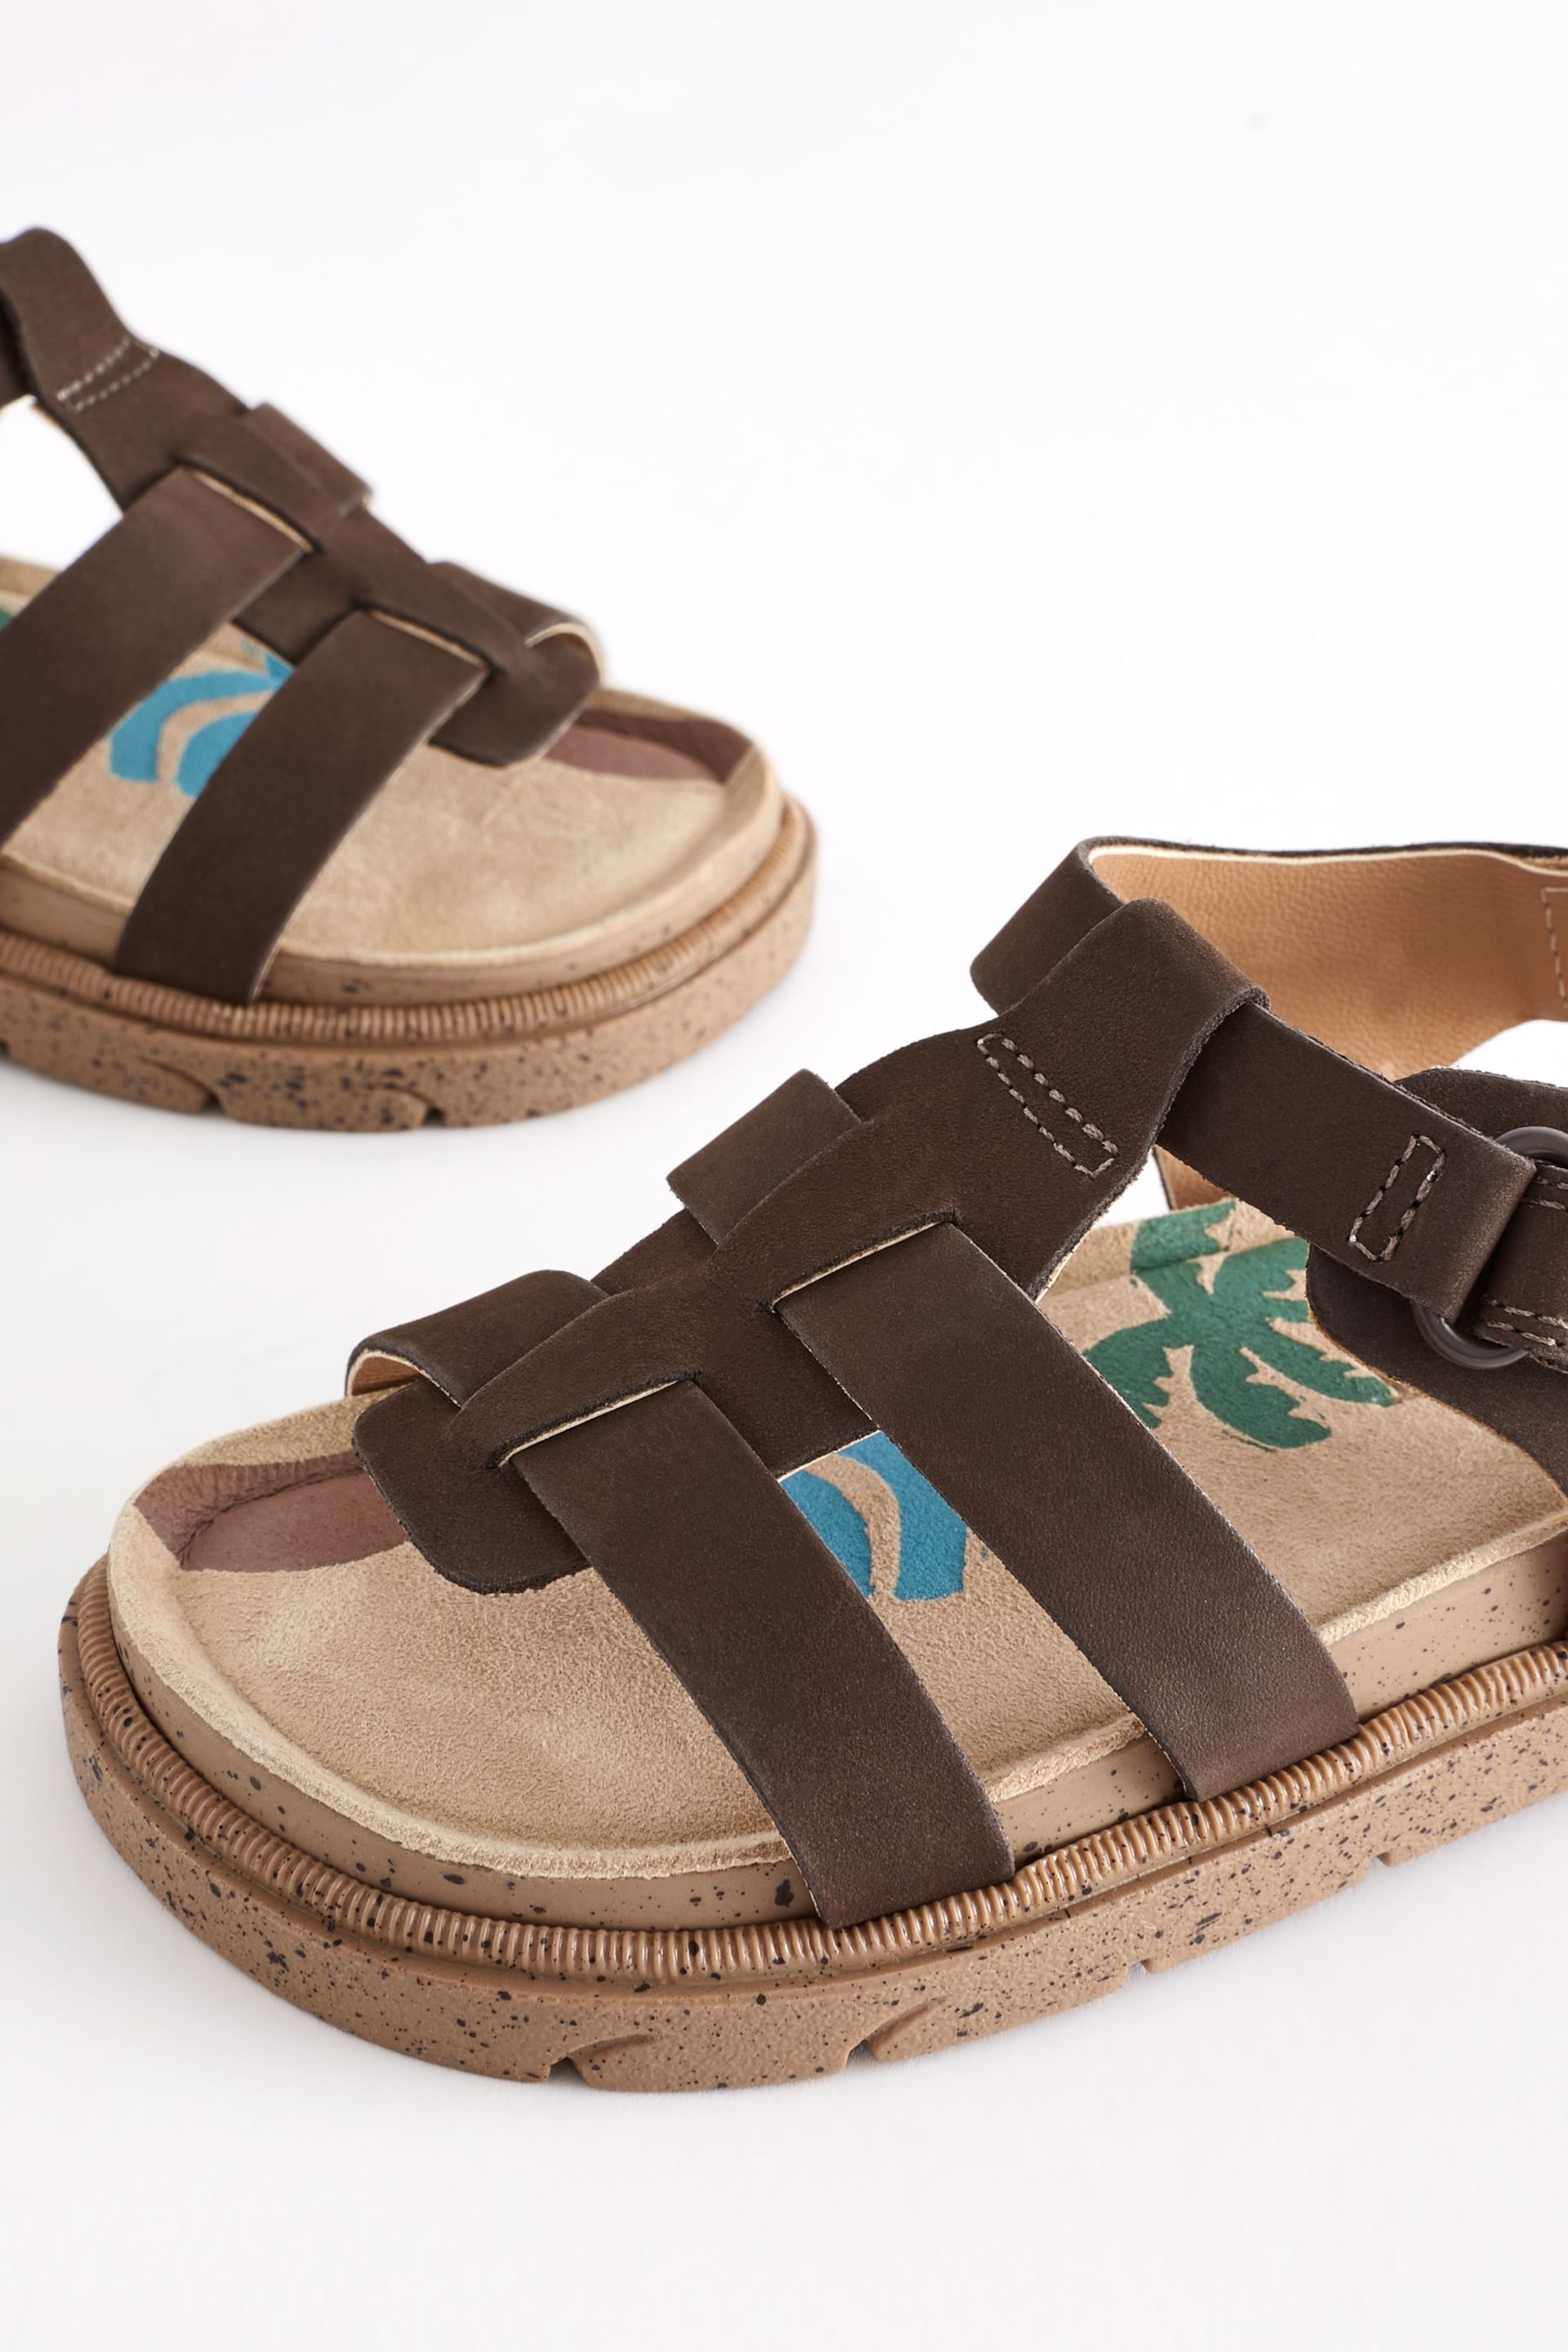 Brown Leather Fisherman Sandals - Image 5 of 7